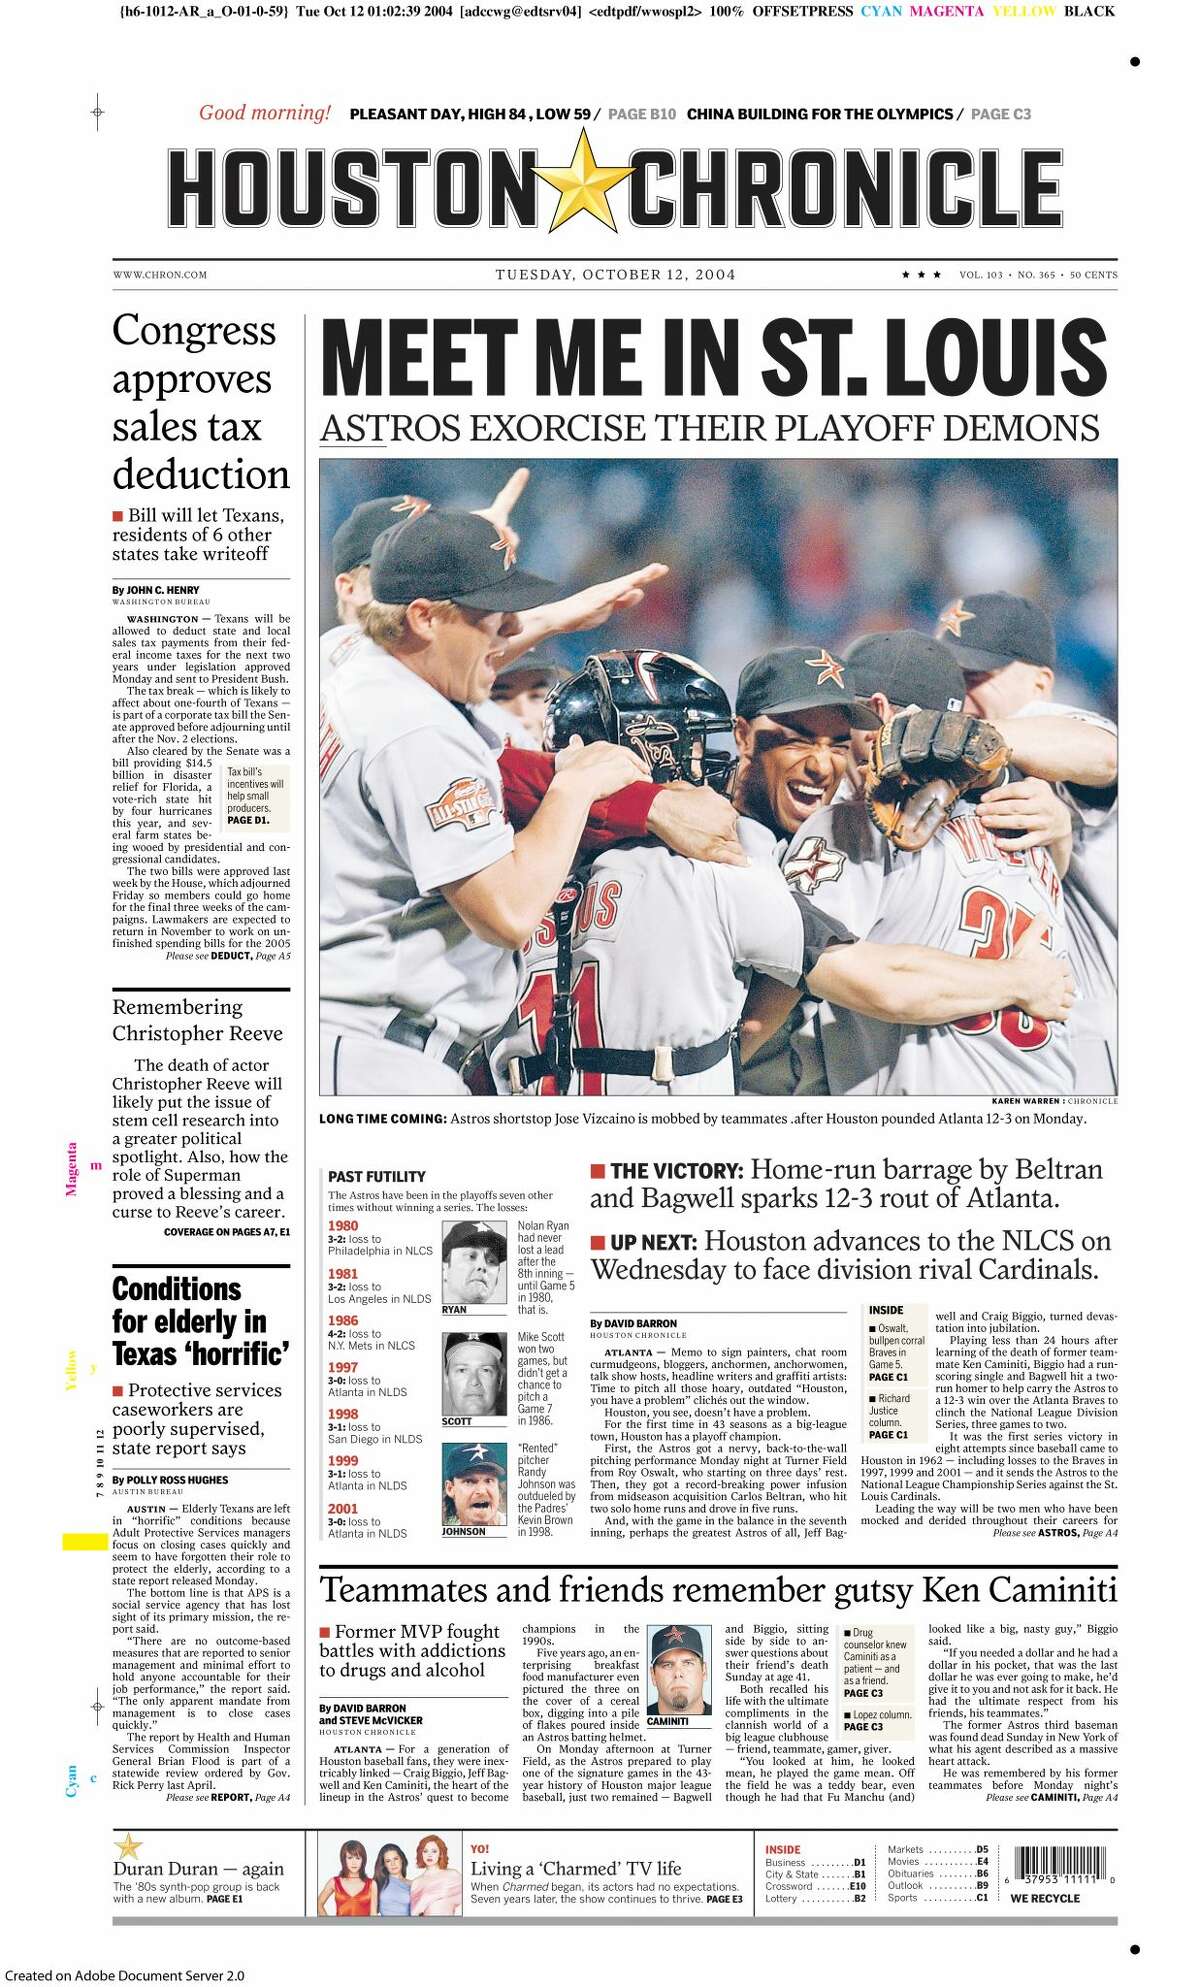 The Houston Chronicle's Oct. 12, 2004,  front page after the Astros' Game 5 win over the Braves in the NLDS.